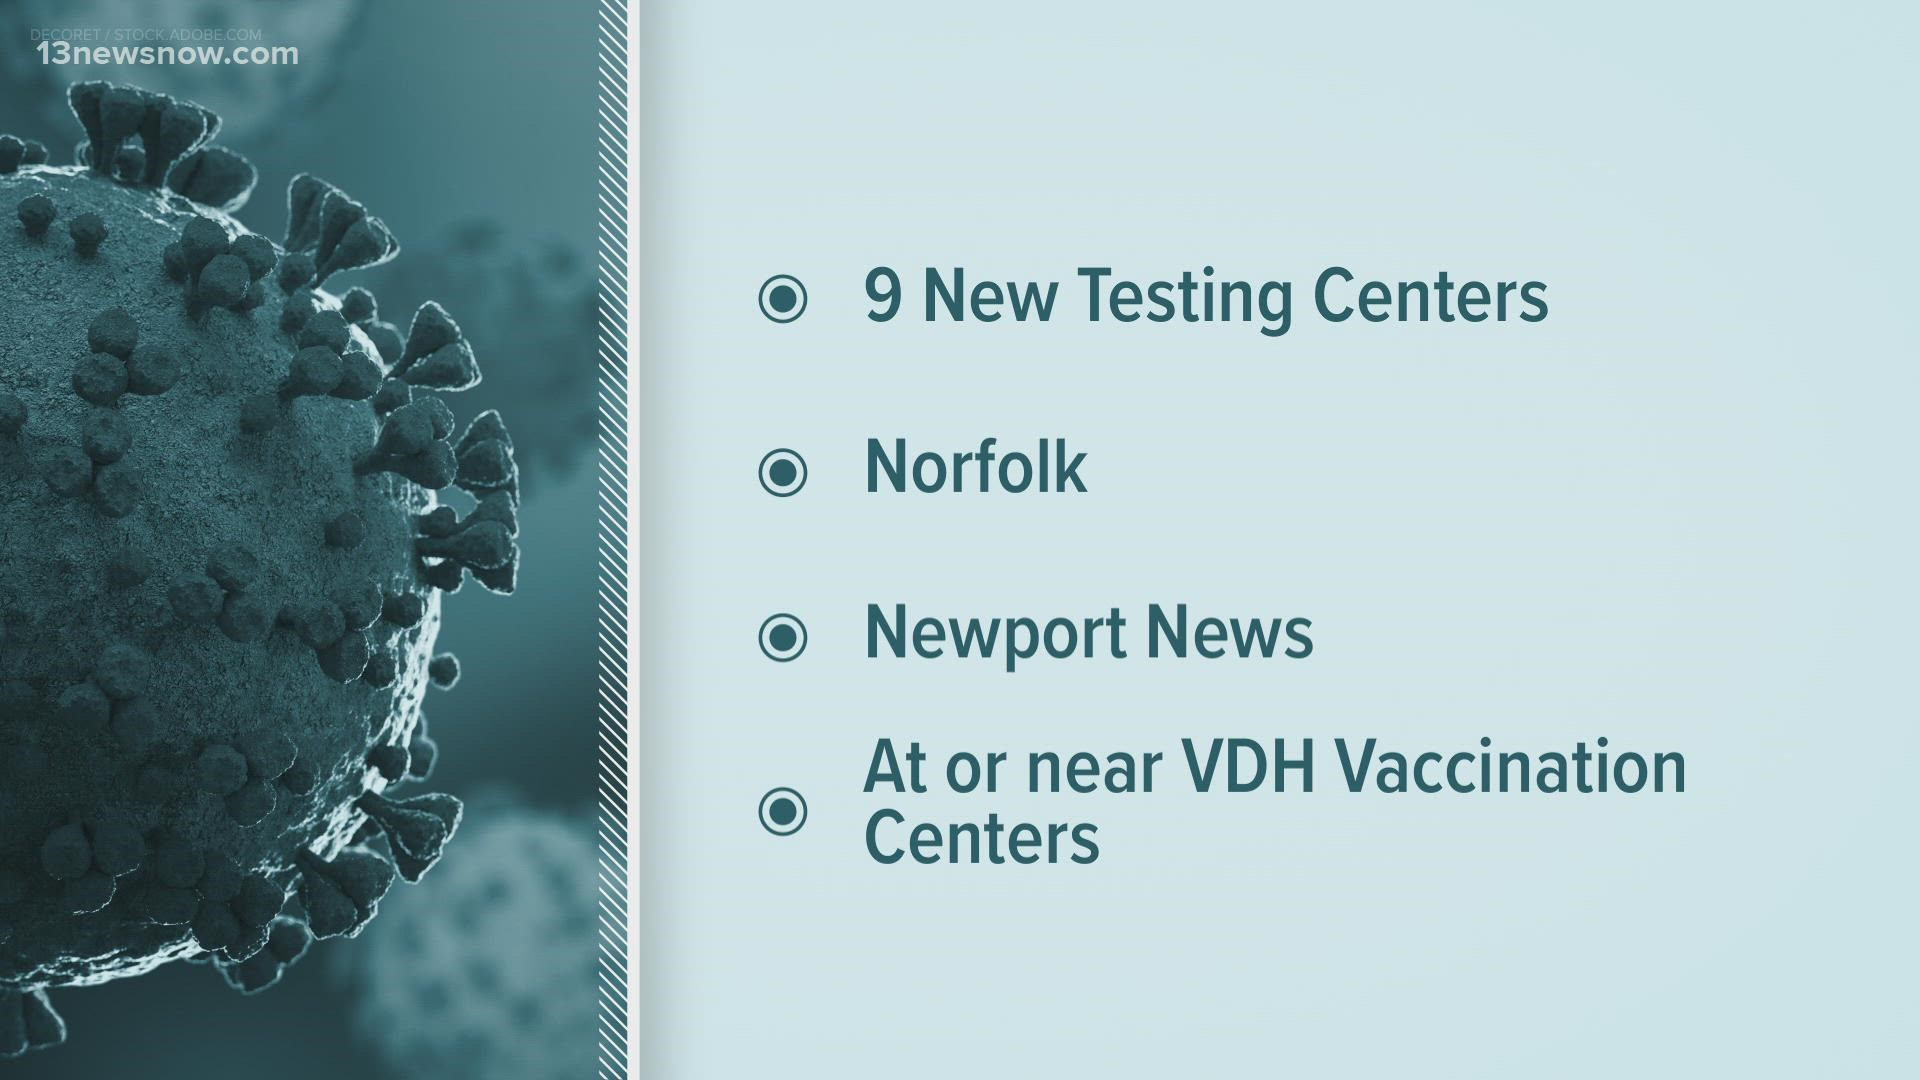 Virginia Gov. Ralph Northam announced the state will be getting nine new COVID-19 testing centers, thanks to a $5 million grant.